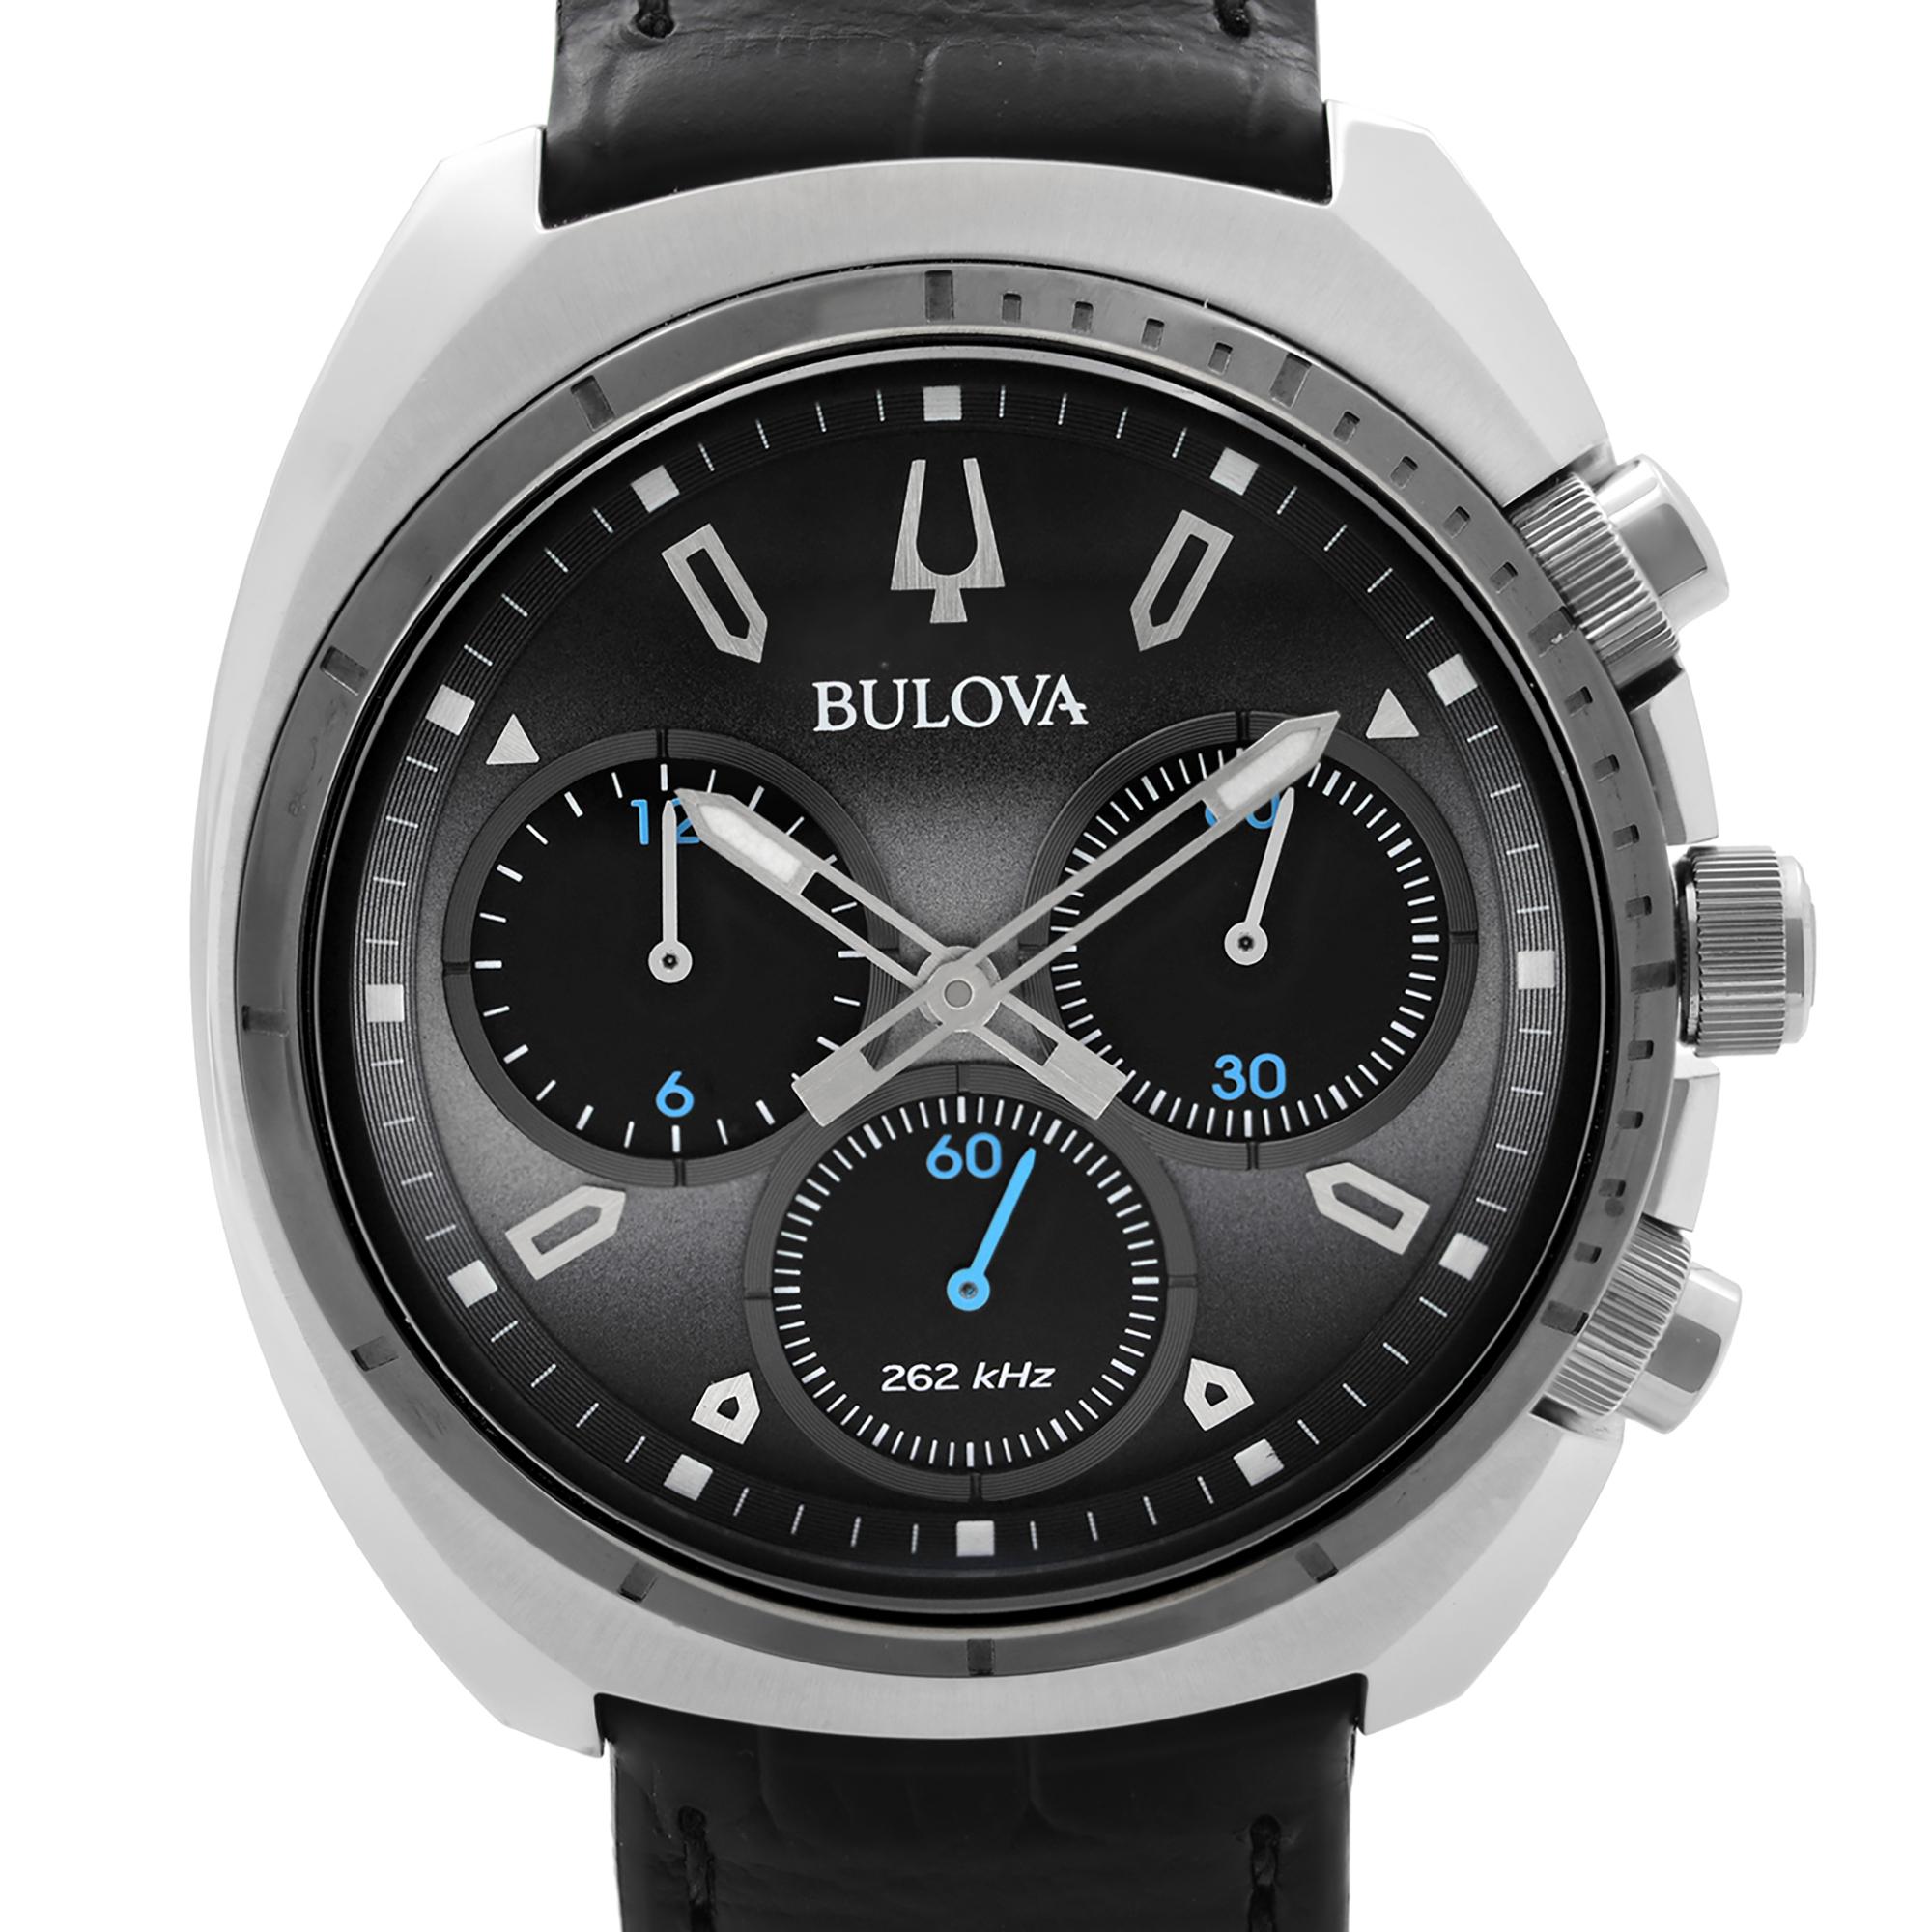 New With Defects Bulova Curv 43mm Chronograph Stainless Steel Dark Gray Dial Quartz Mens Watch 98A155. The Watch Has Glue Marks on the Inner Side of the Band and Might Have Minor Blemishes on the Bezel. This Beautiful Timepiece Features: Stainless